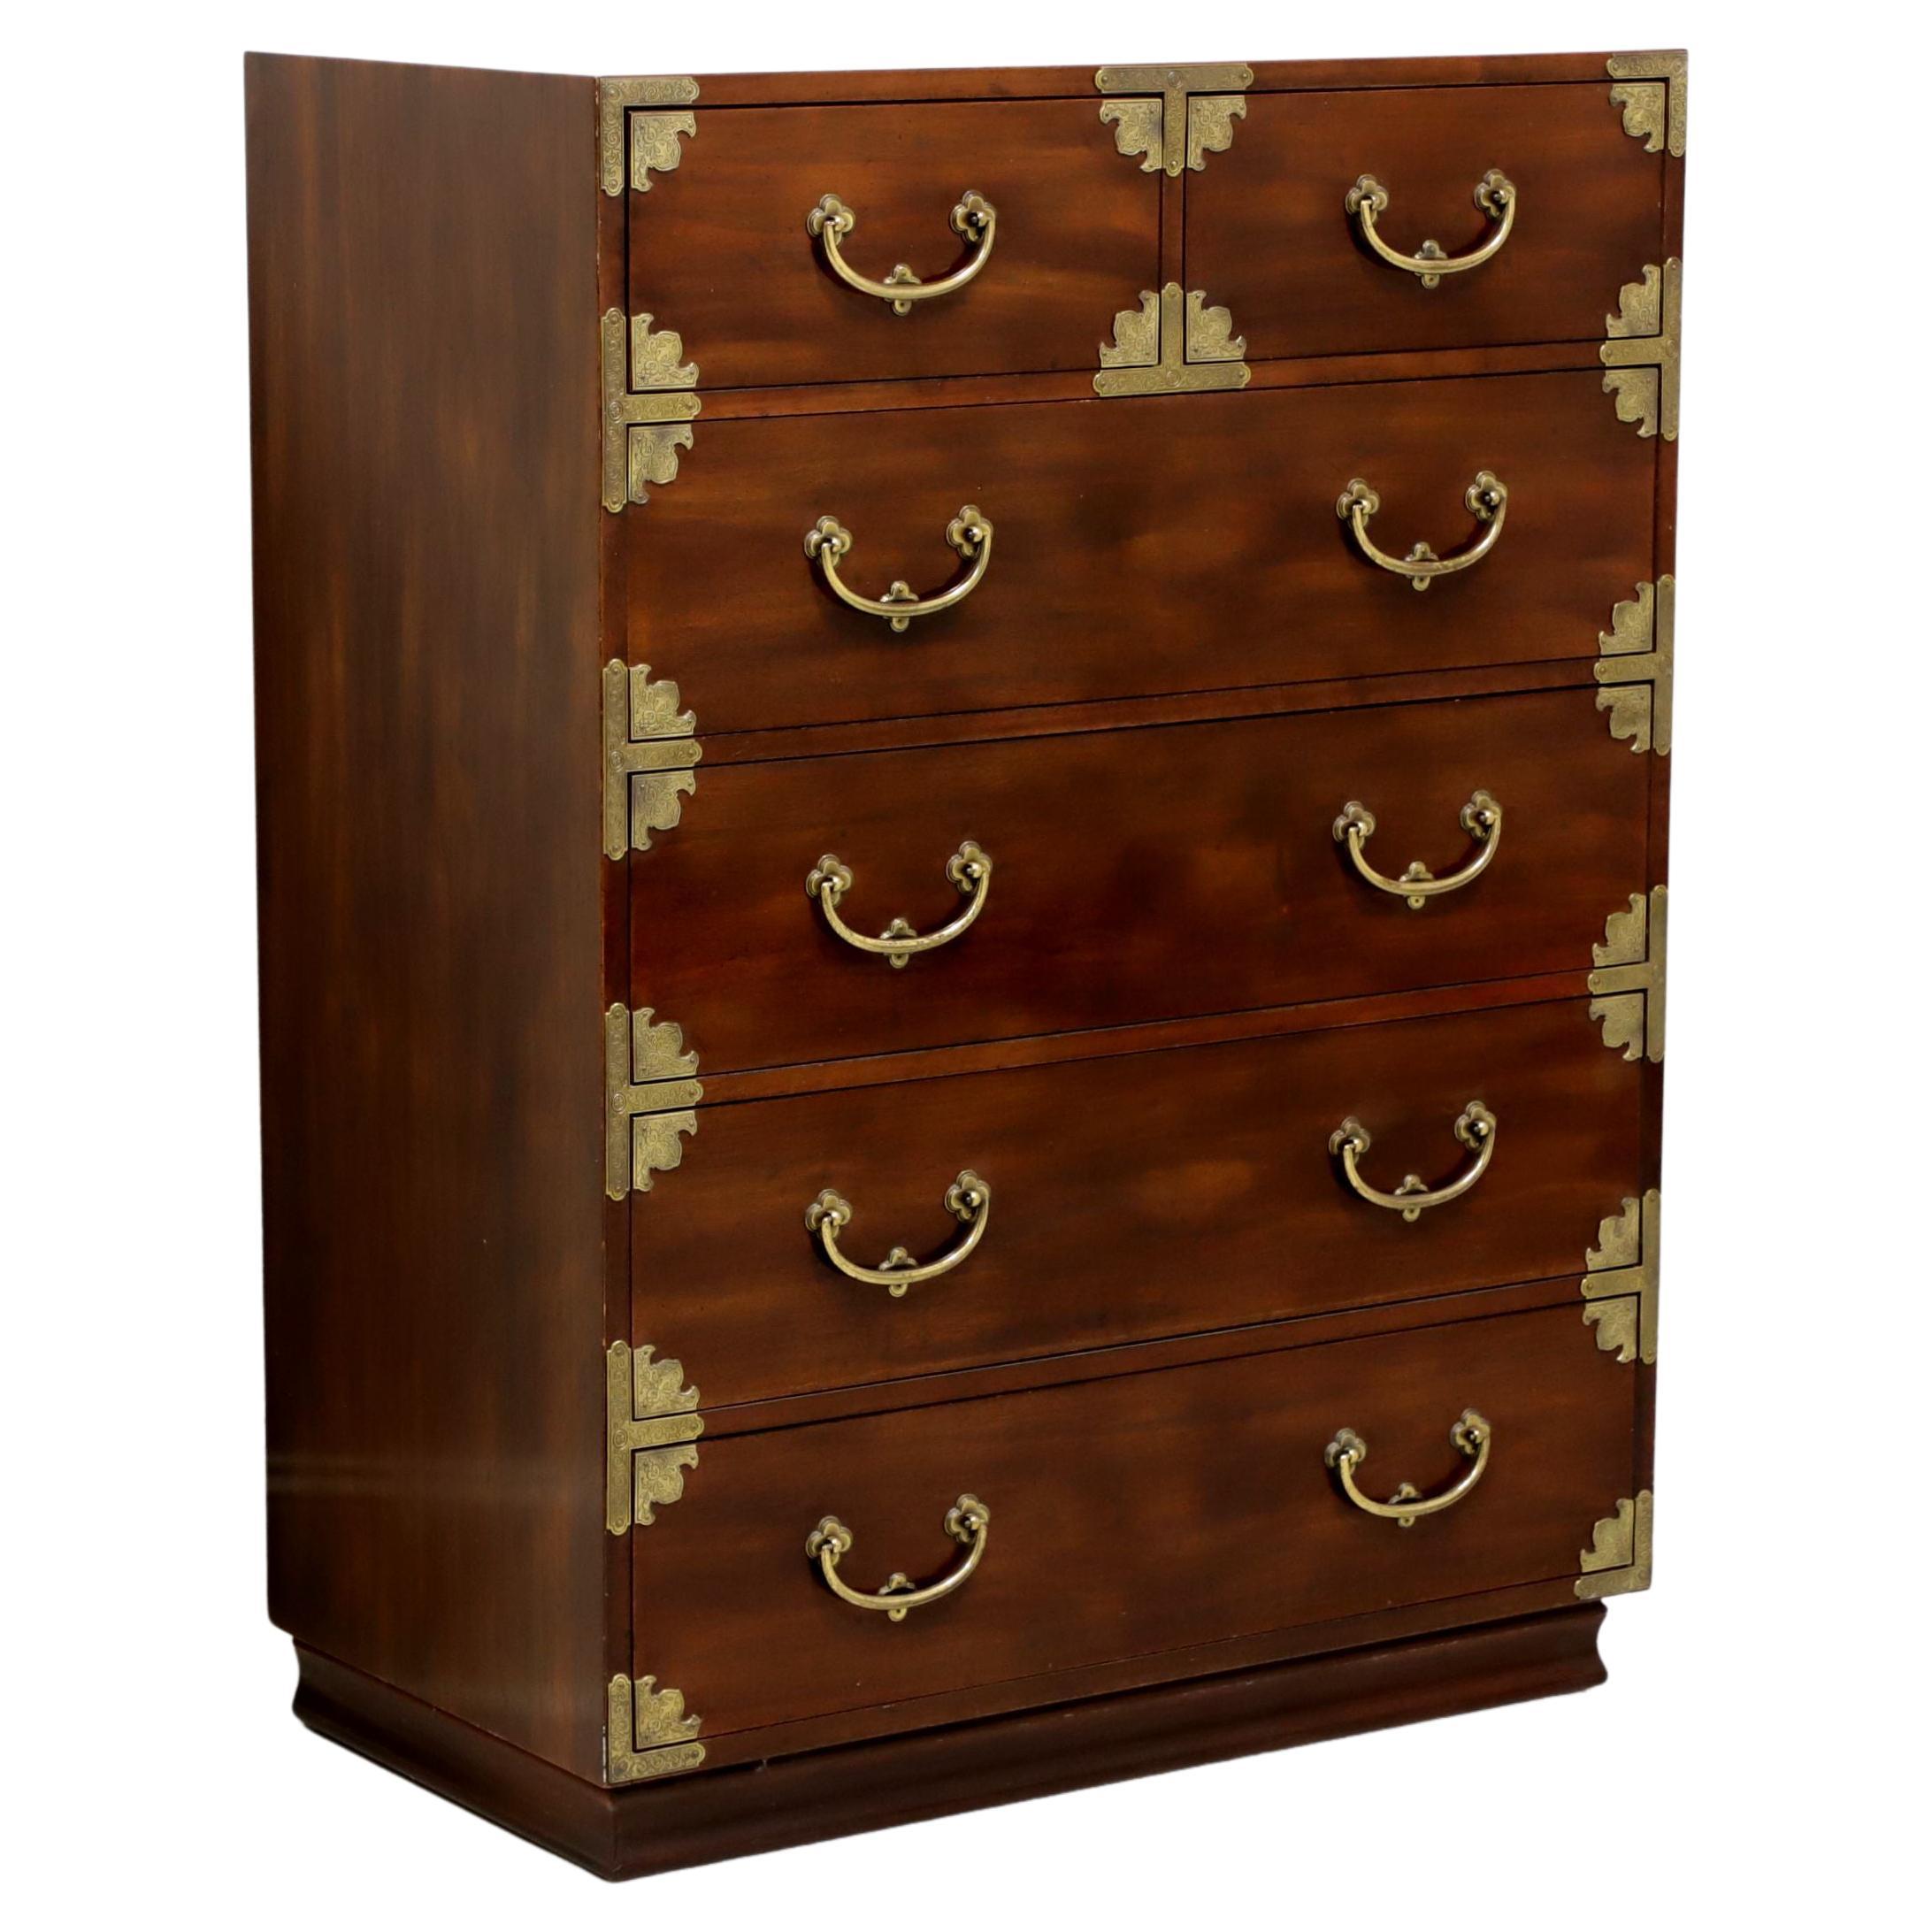 HENREDON Asian Japanese Tansu Campaign Style Chest of Drawers